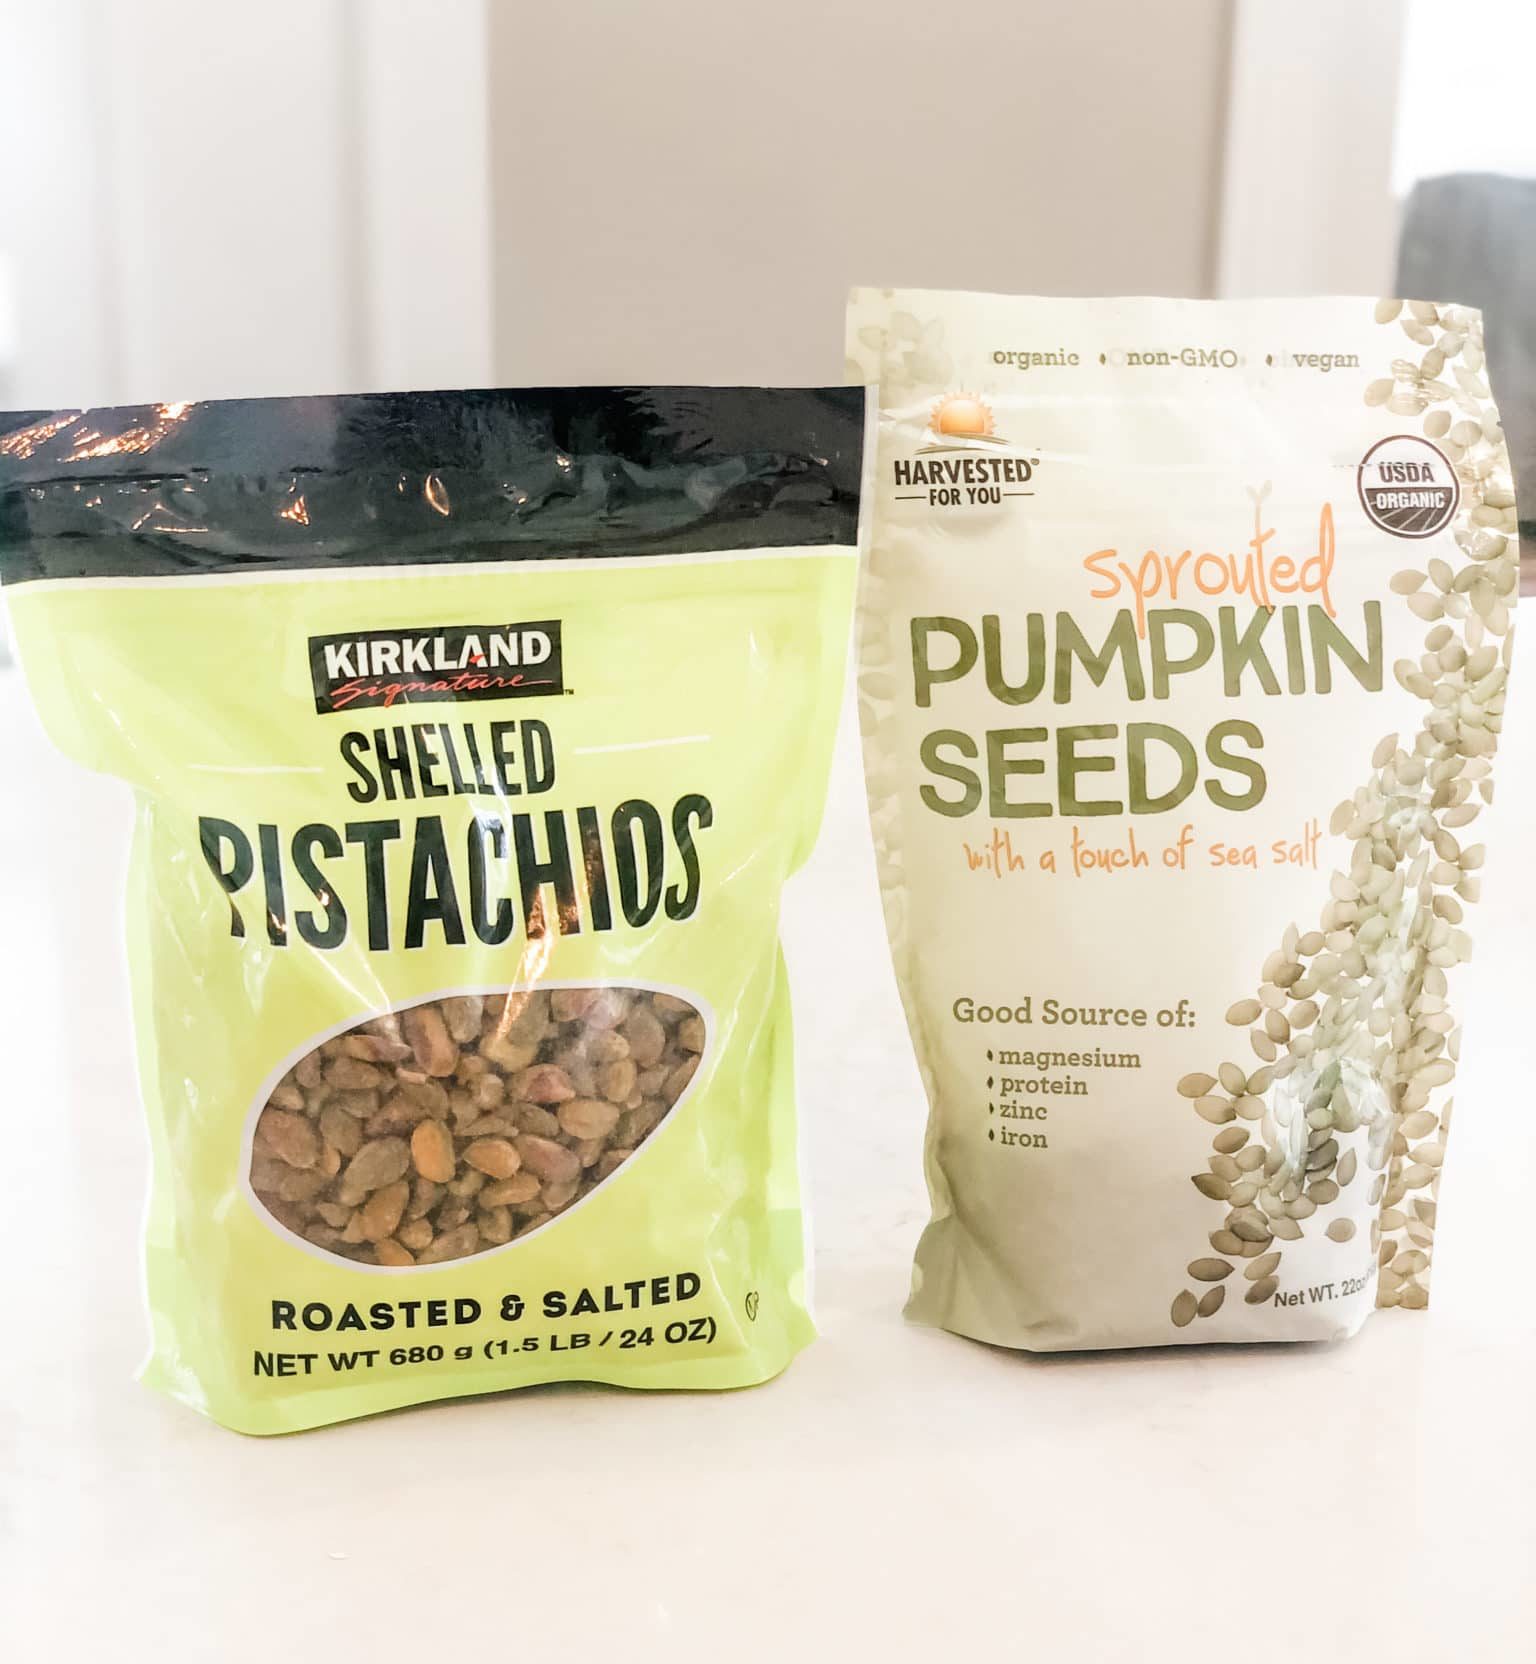 Costco nuts and seeds, photo pistachios and pumpkin seeds